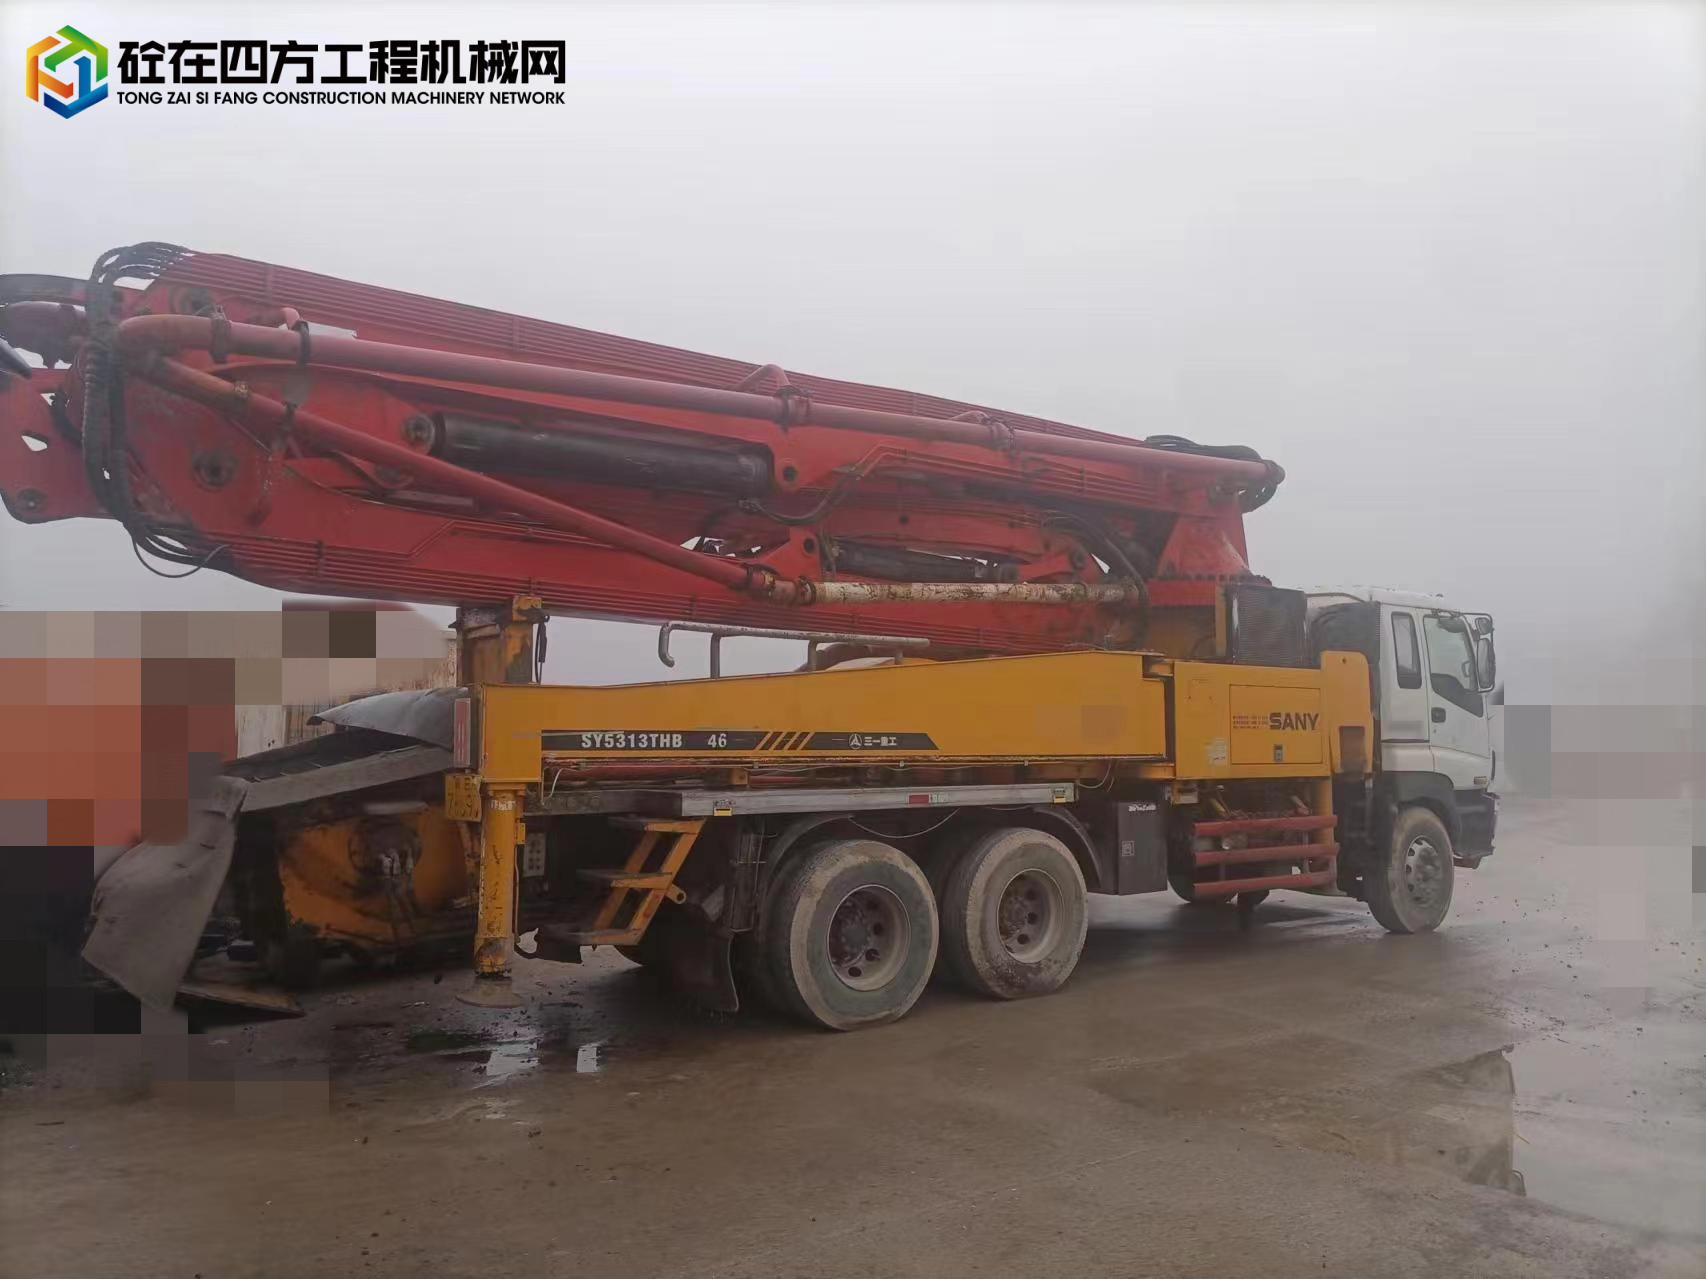 https://images.tongzsf.com/tong/truck_machine/20240325/16600ce0a37a77.jpg